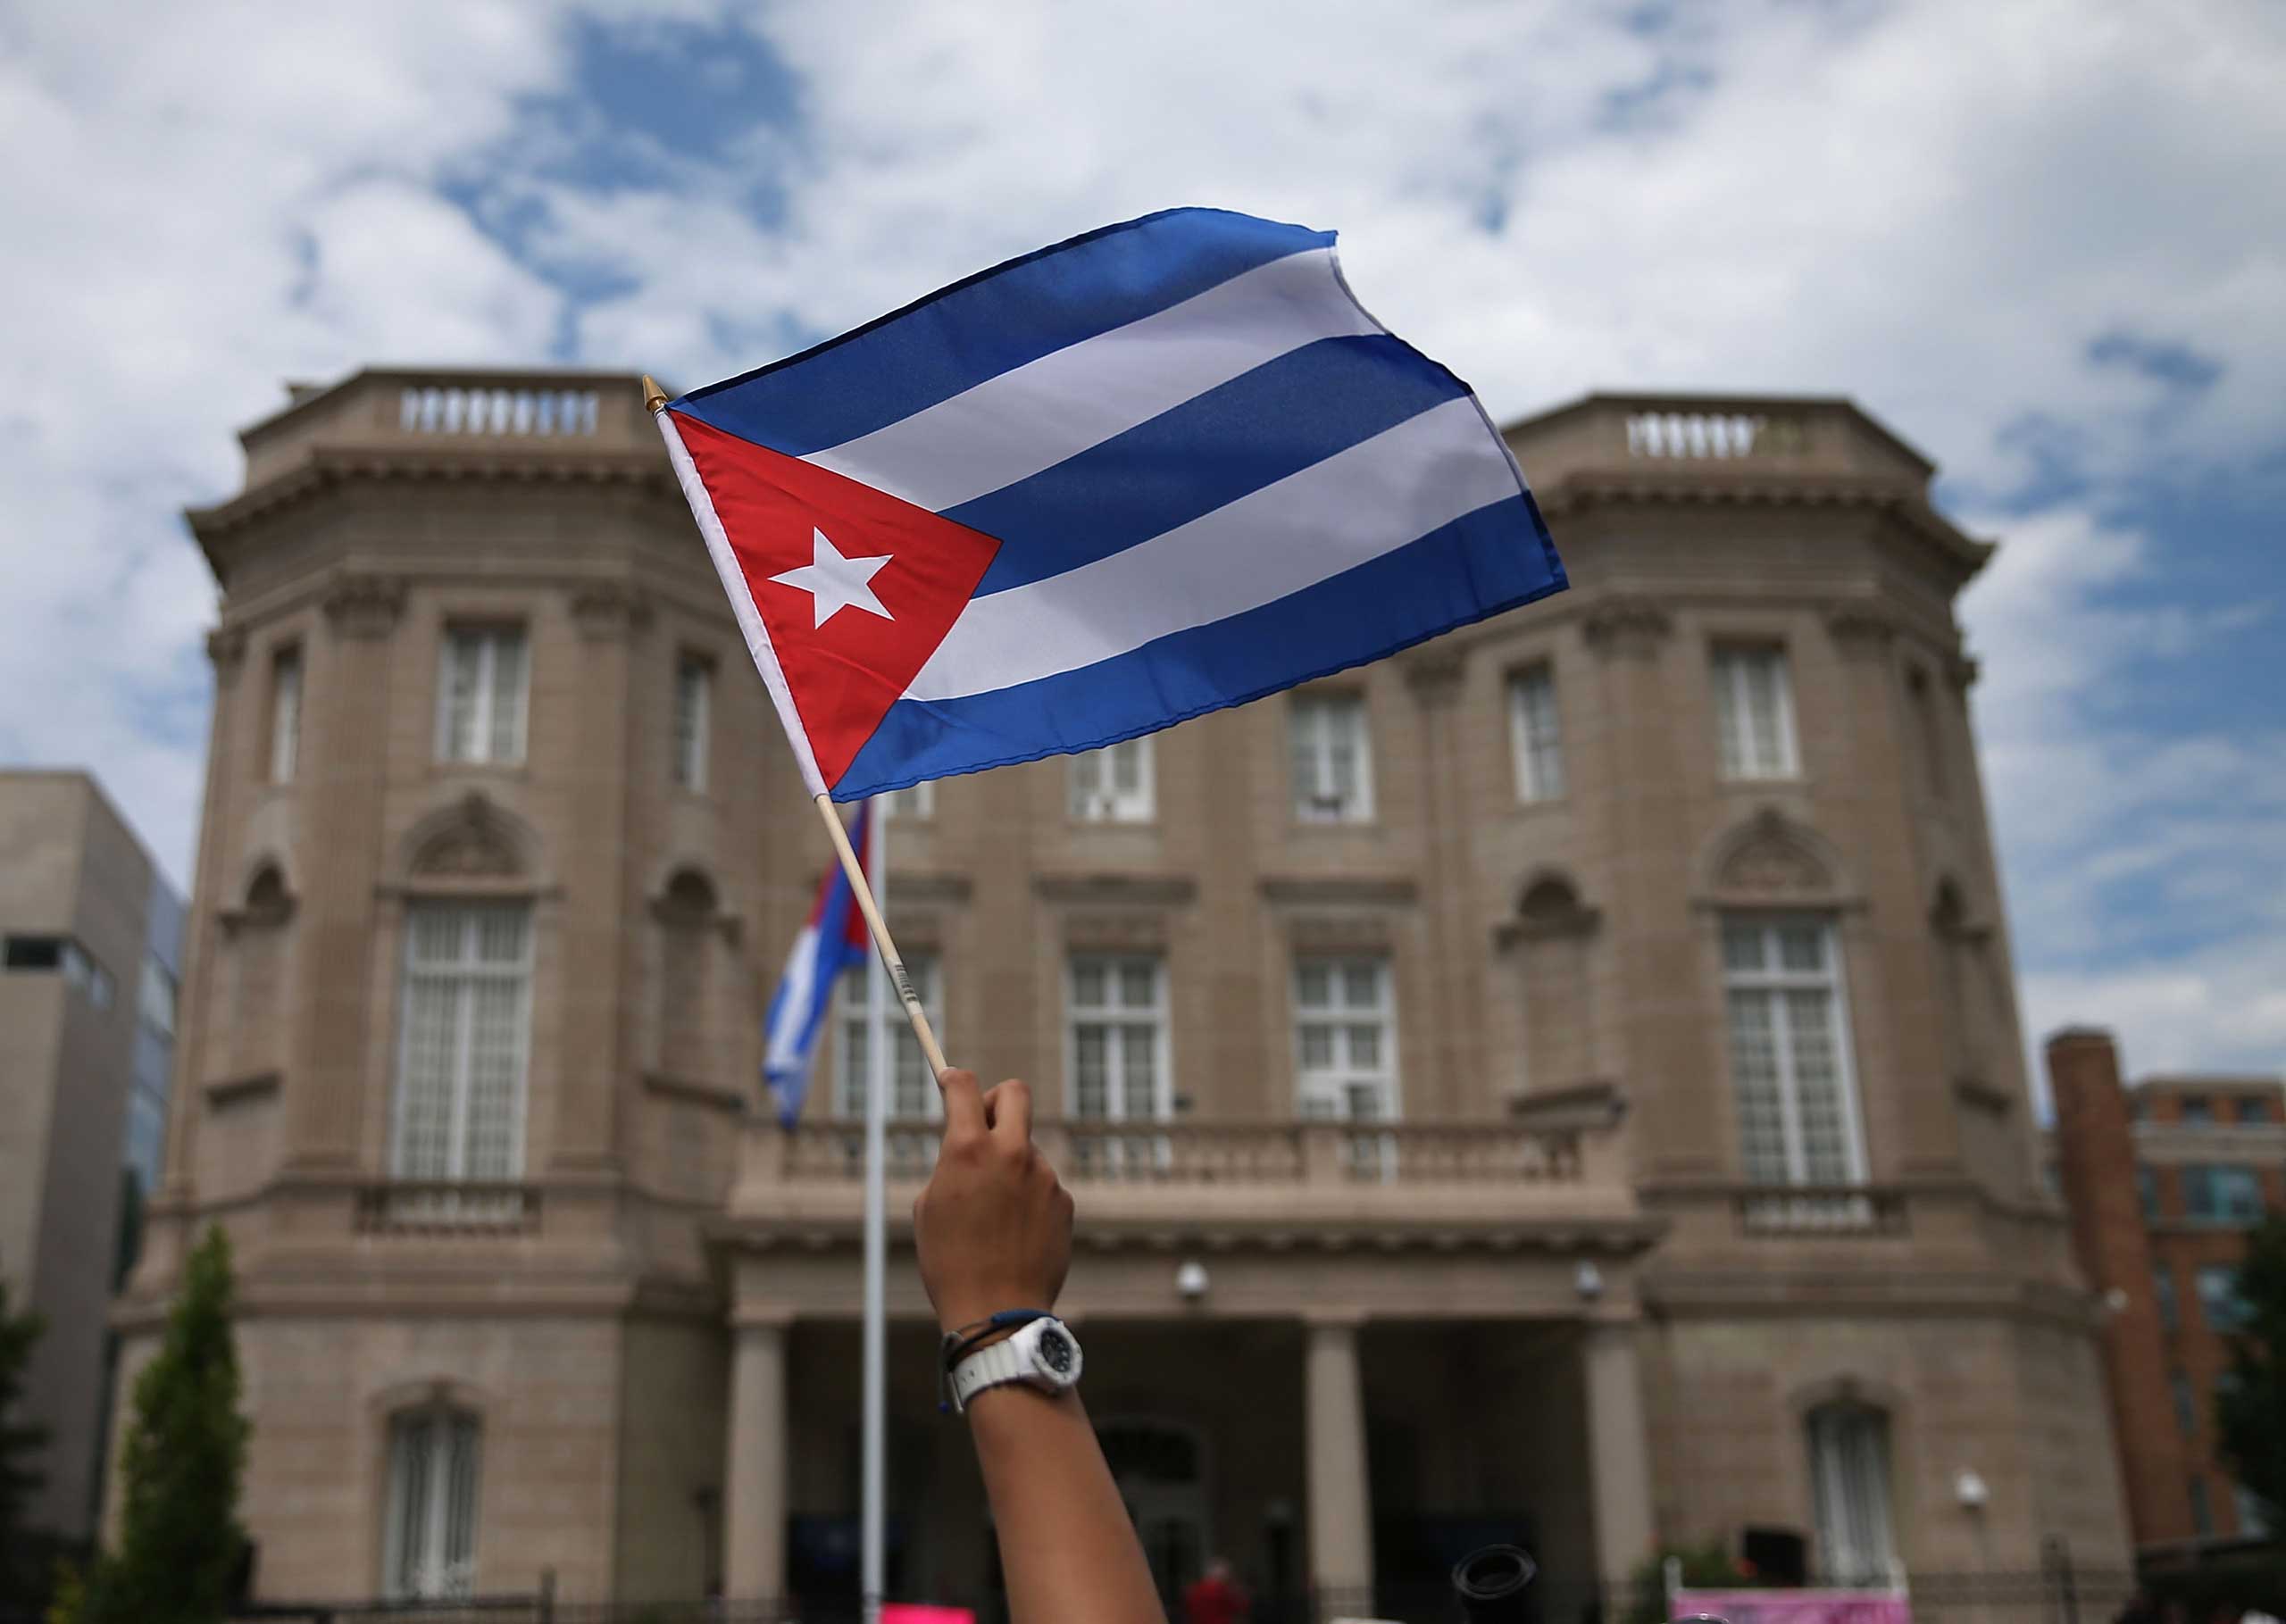 A supporter waves a Cuban flag in front of the country's embassy after it re-opened for the first time in 54 years in Washington, DC., July 20, 2015 (Mark Wilson — Getty Images)